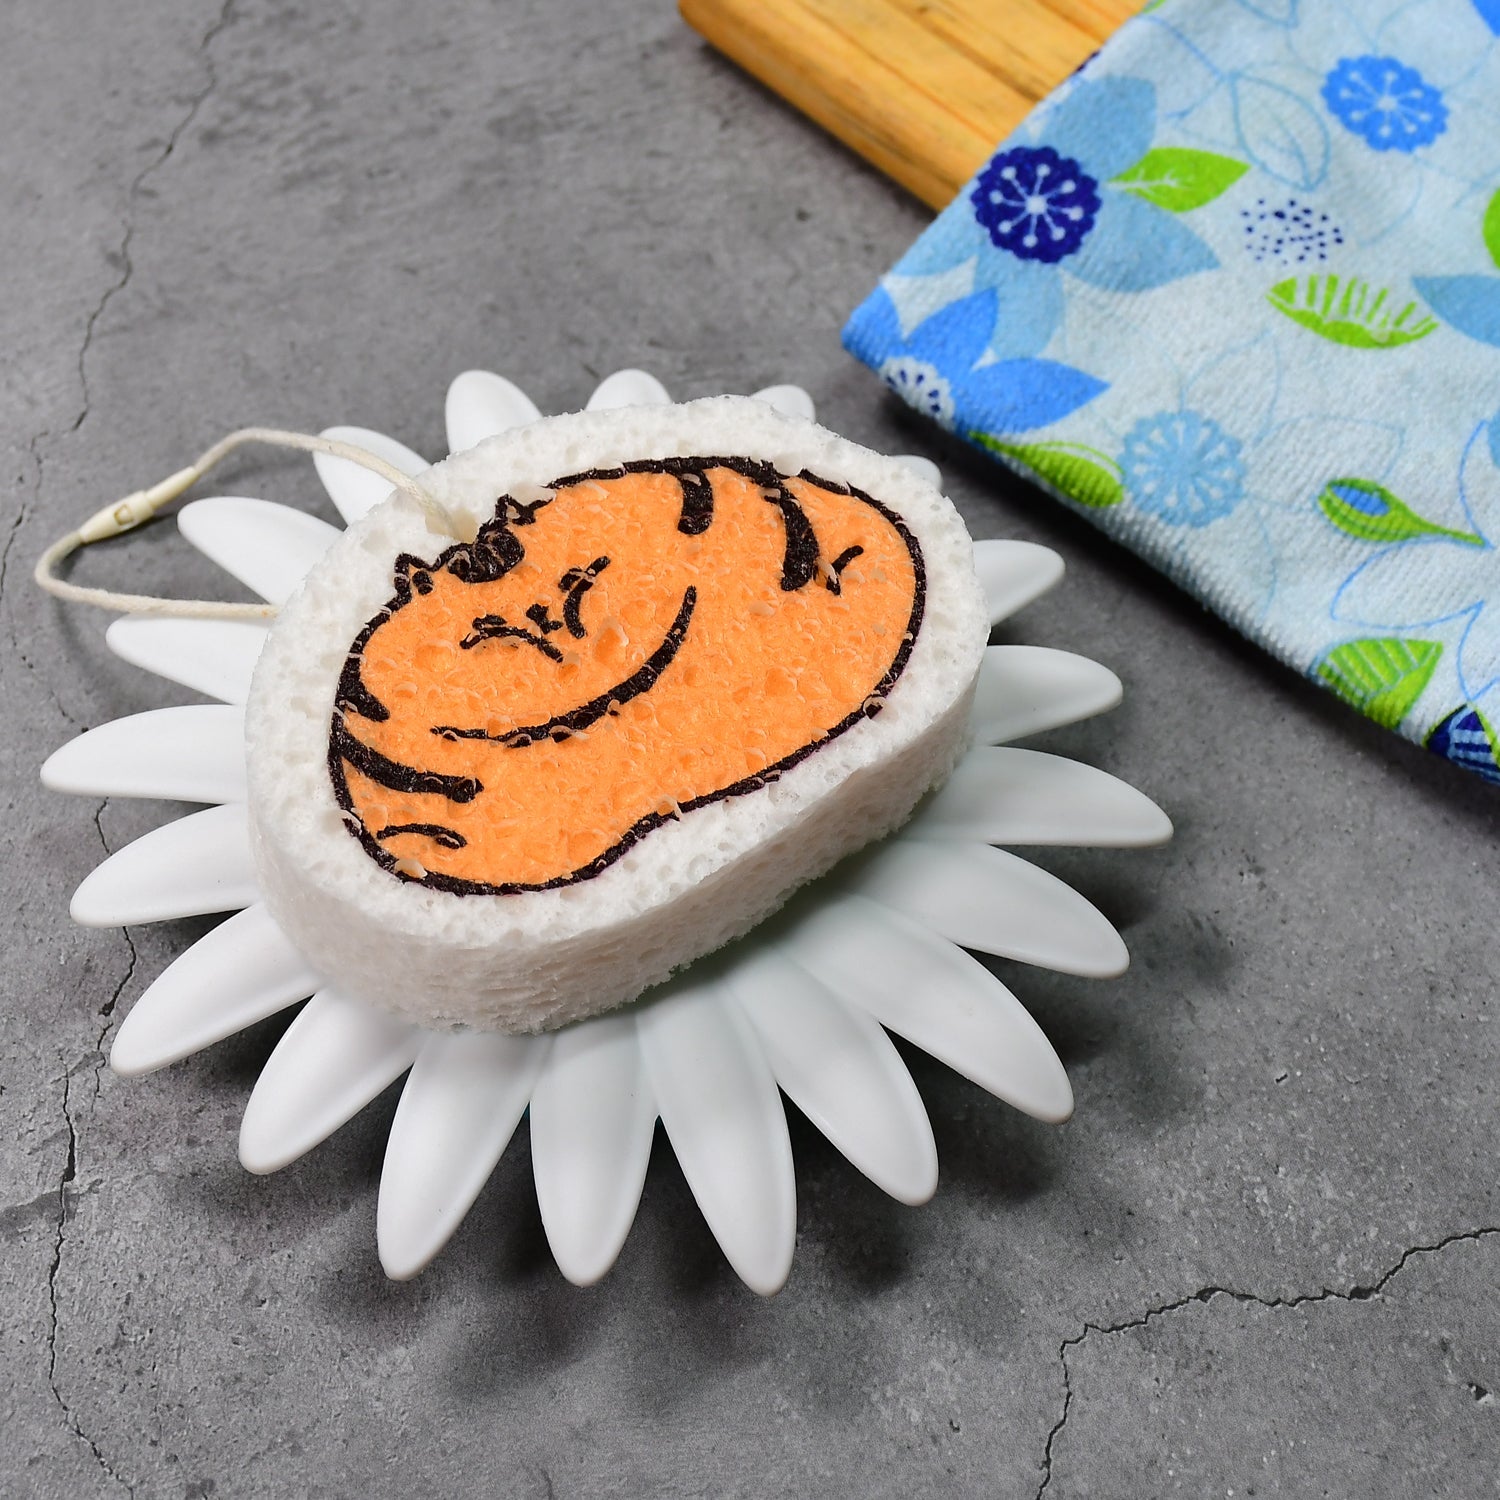 6428A Compressed Wood Pulp Sponge. Creative Cartoon Design Scouring Pad Dishwashing Absorbing Pad. Kitchen Cleaning Tool. DeoDap